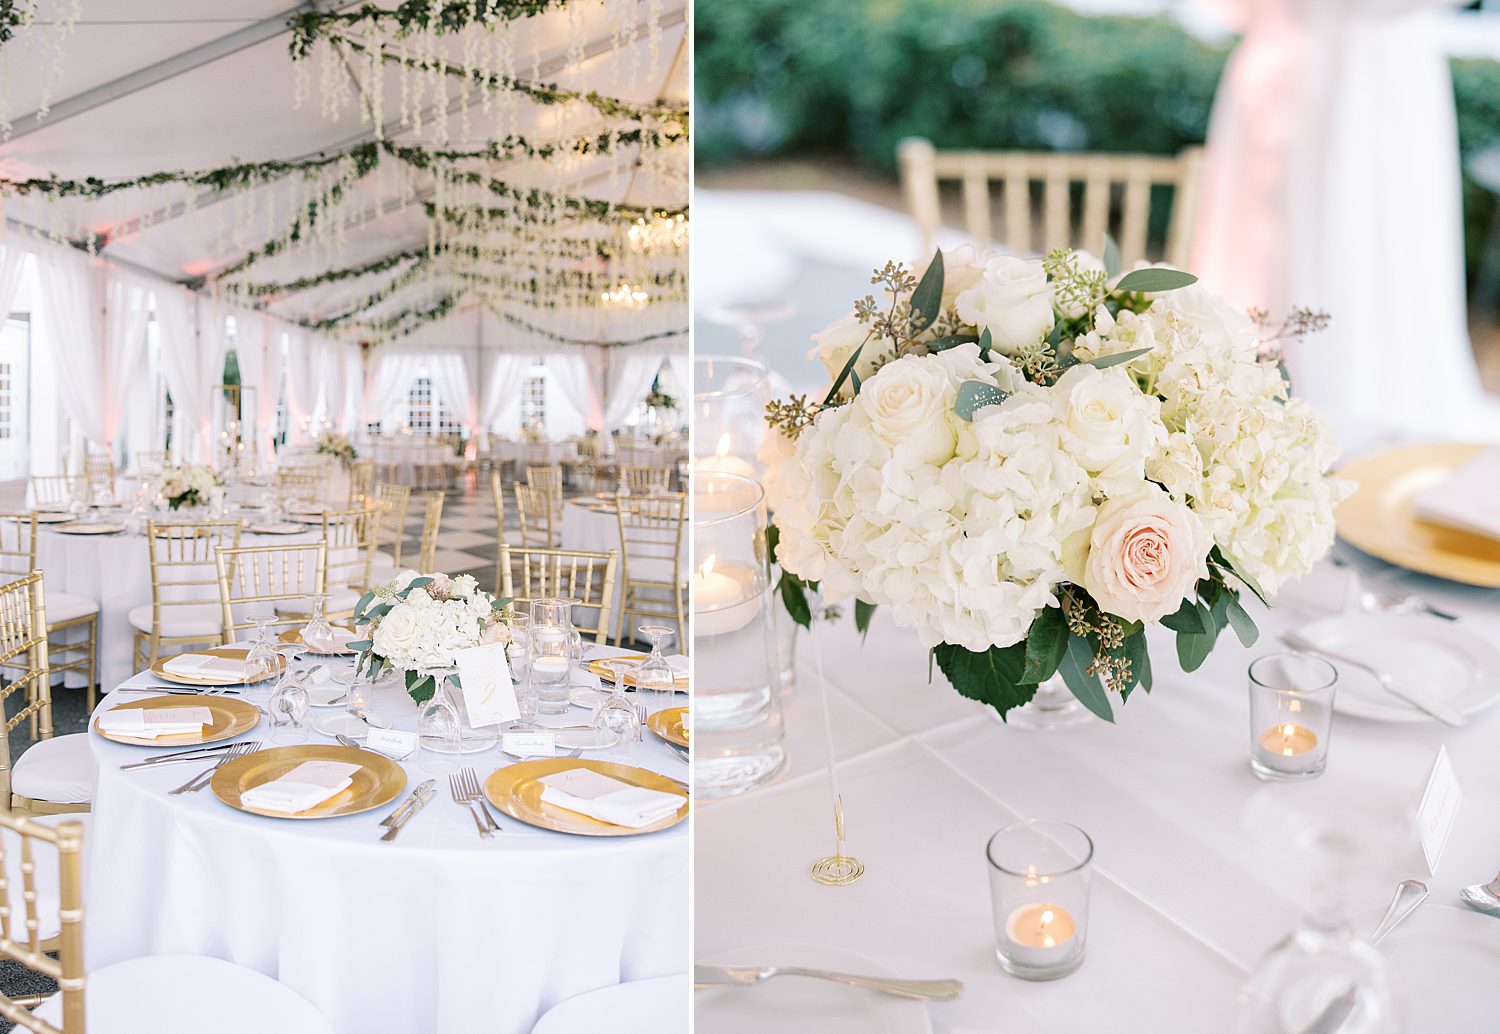 Tampa Yacht Club wedding reception with blush and ivory flower centerpieces 